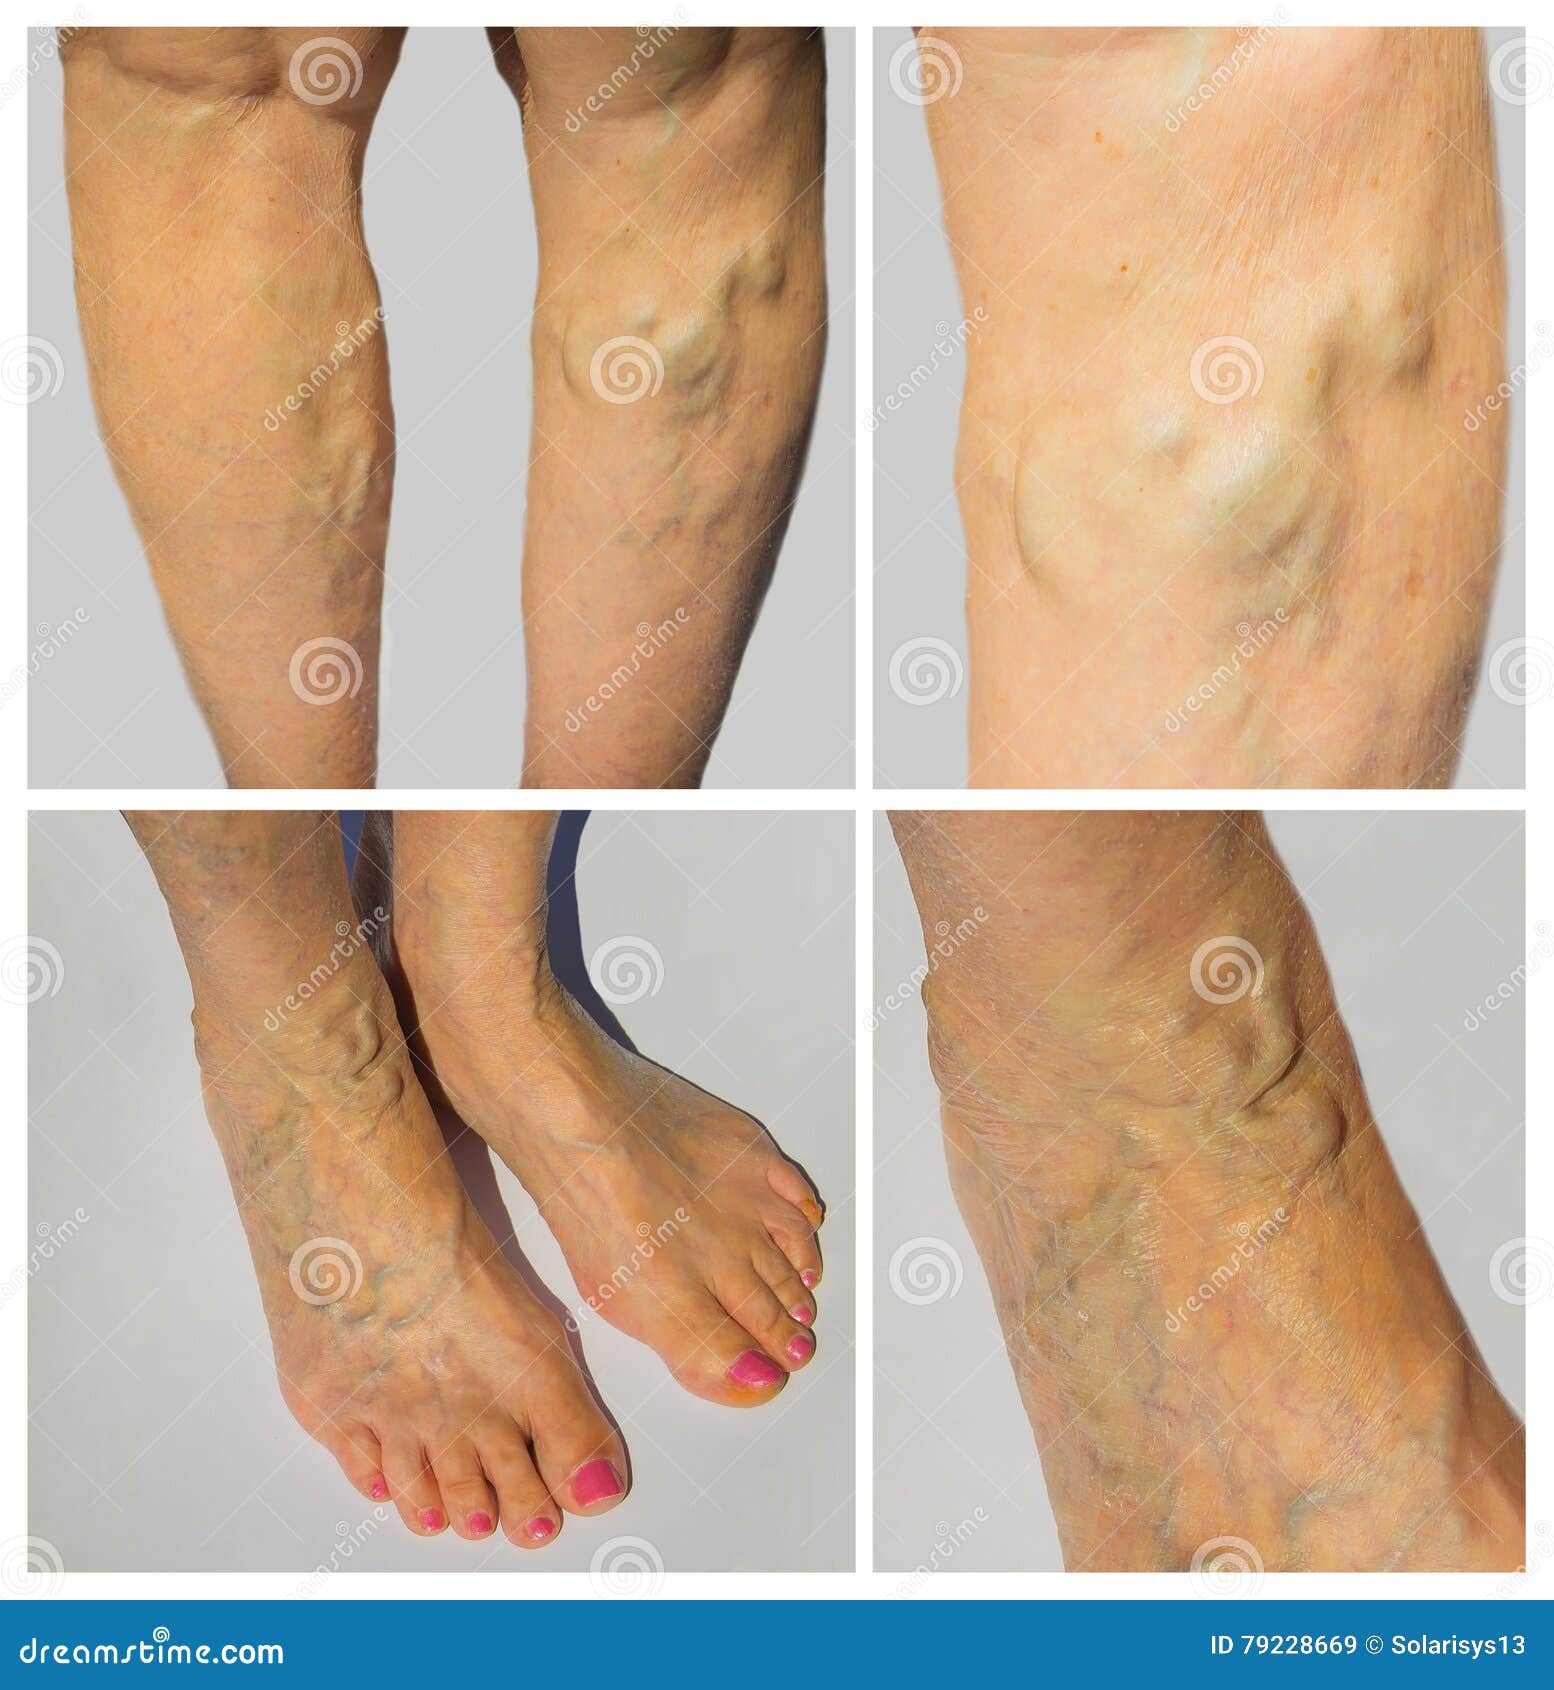 Varicose Veins on a Female Legs Stock Image - Image of care, issue